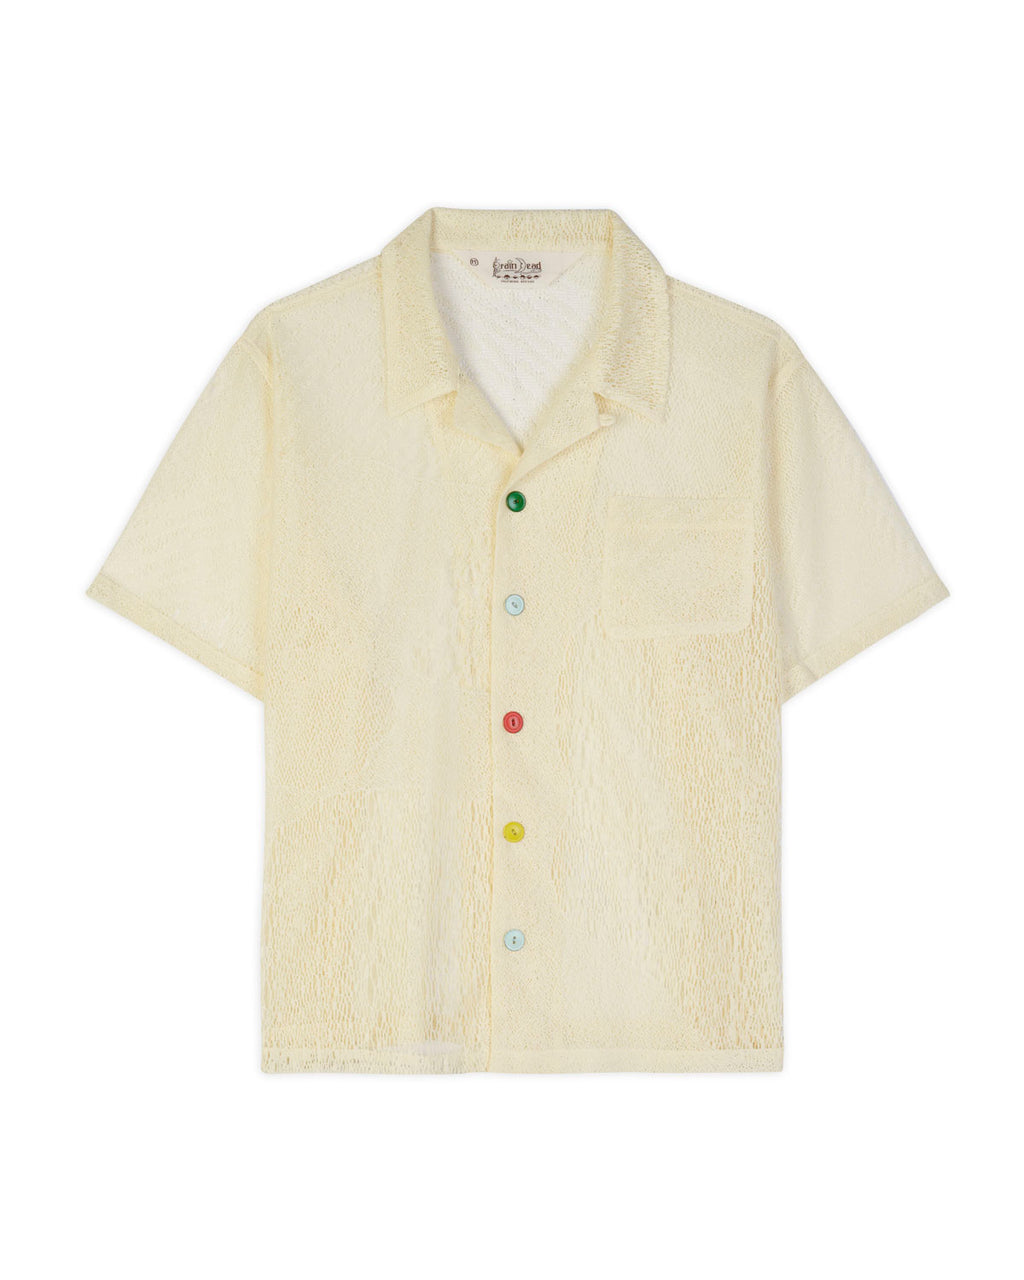 Engineered Mesh Short Sleeve Button Up - Natural 1